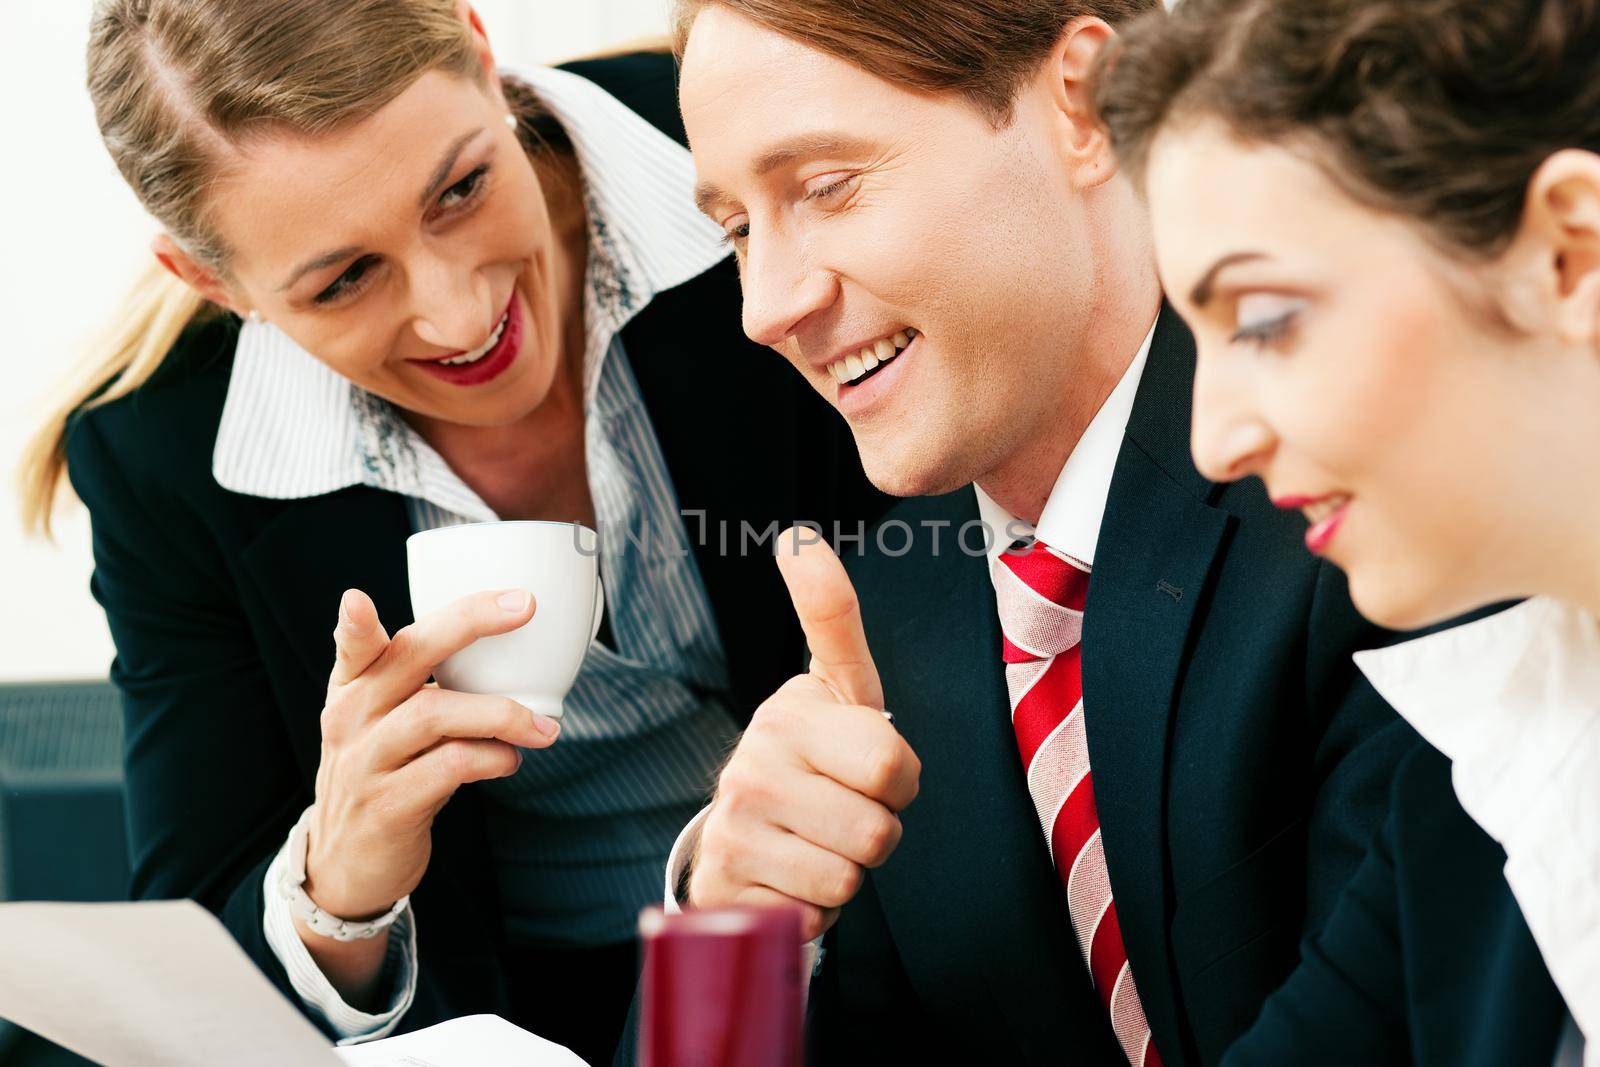 Small business team - man and two women - working in the office having a success, one woman drinking a mug of coffee